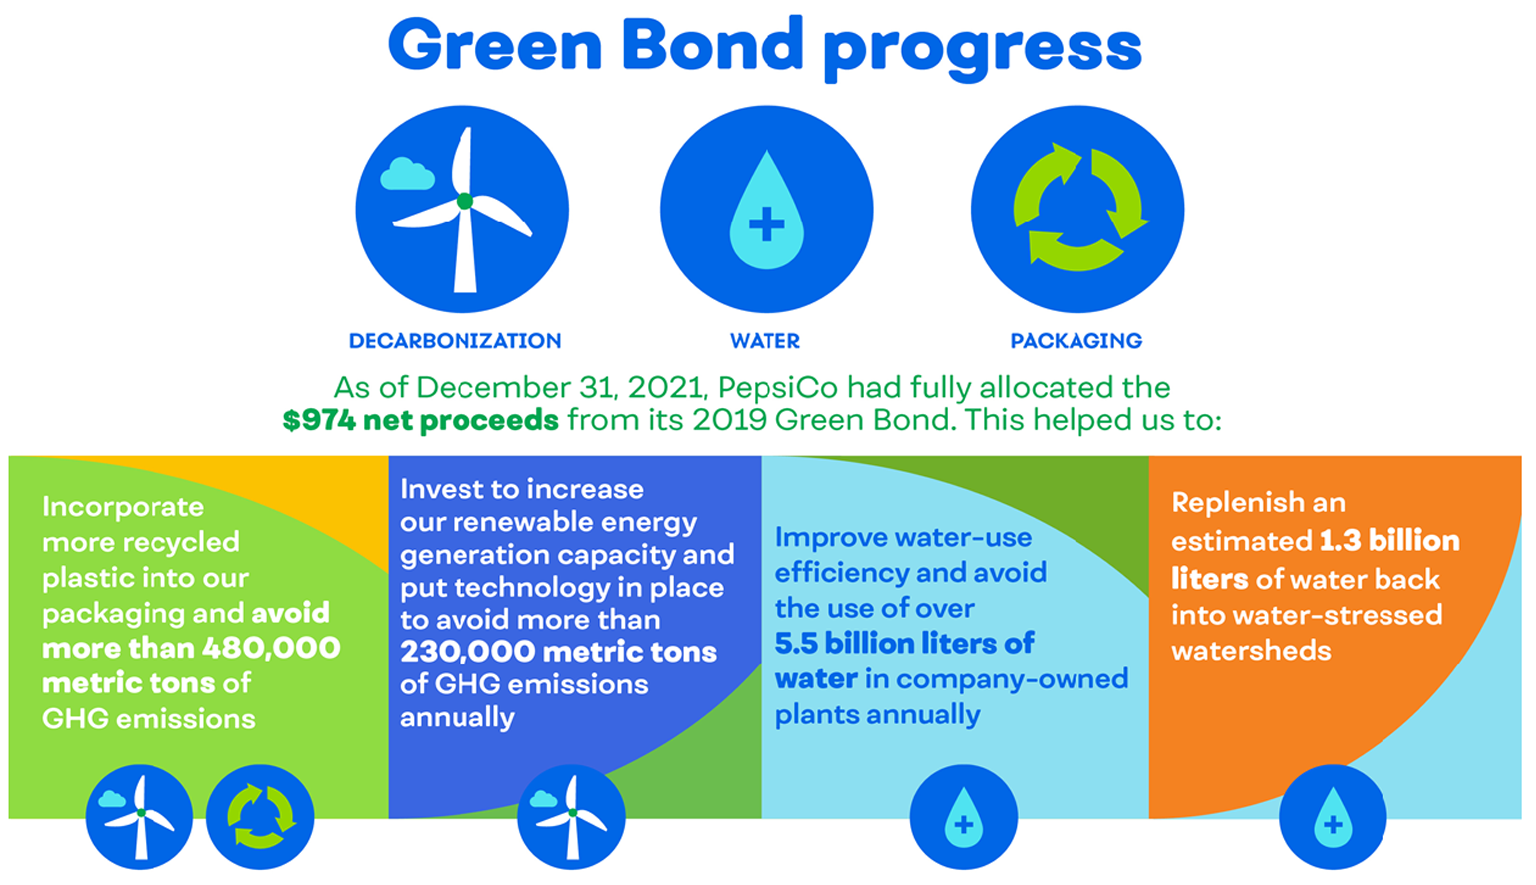 Green Bond progress in decarbonization, water, and packaging: As of December 31, 2021, PepsiCo had fully allocated the $974 net proceeds from its 2019 Green Bond.